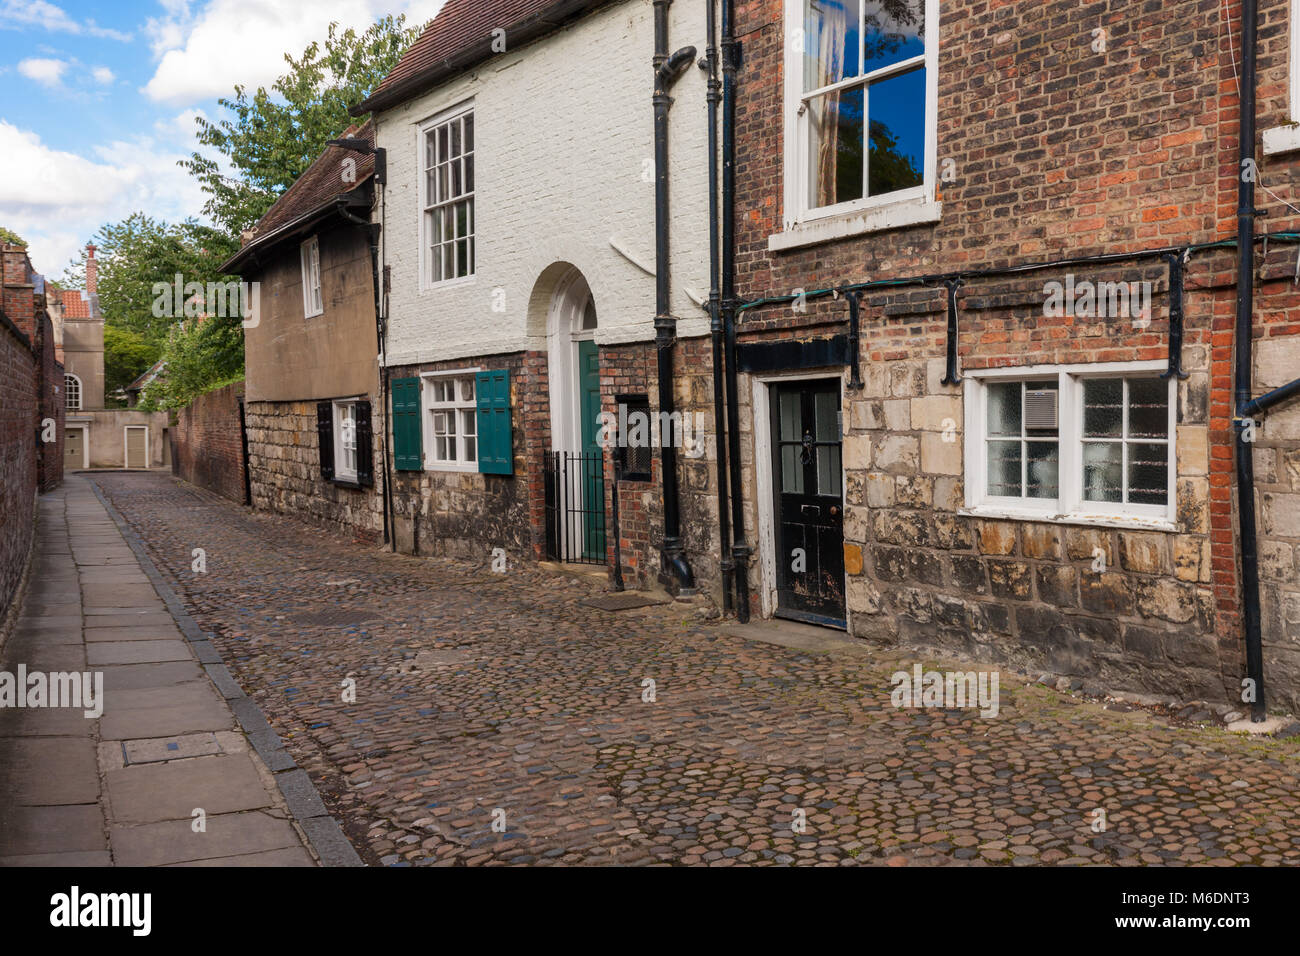 NARROW COBBLED CHAPTER HOUSE STREET, CLOSE TO THE YORK MINSTER AND TREASURER'S HOUSE, YORK ENGLAND. Stock Photo